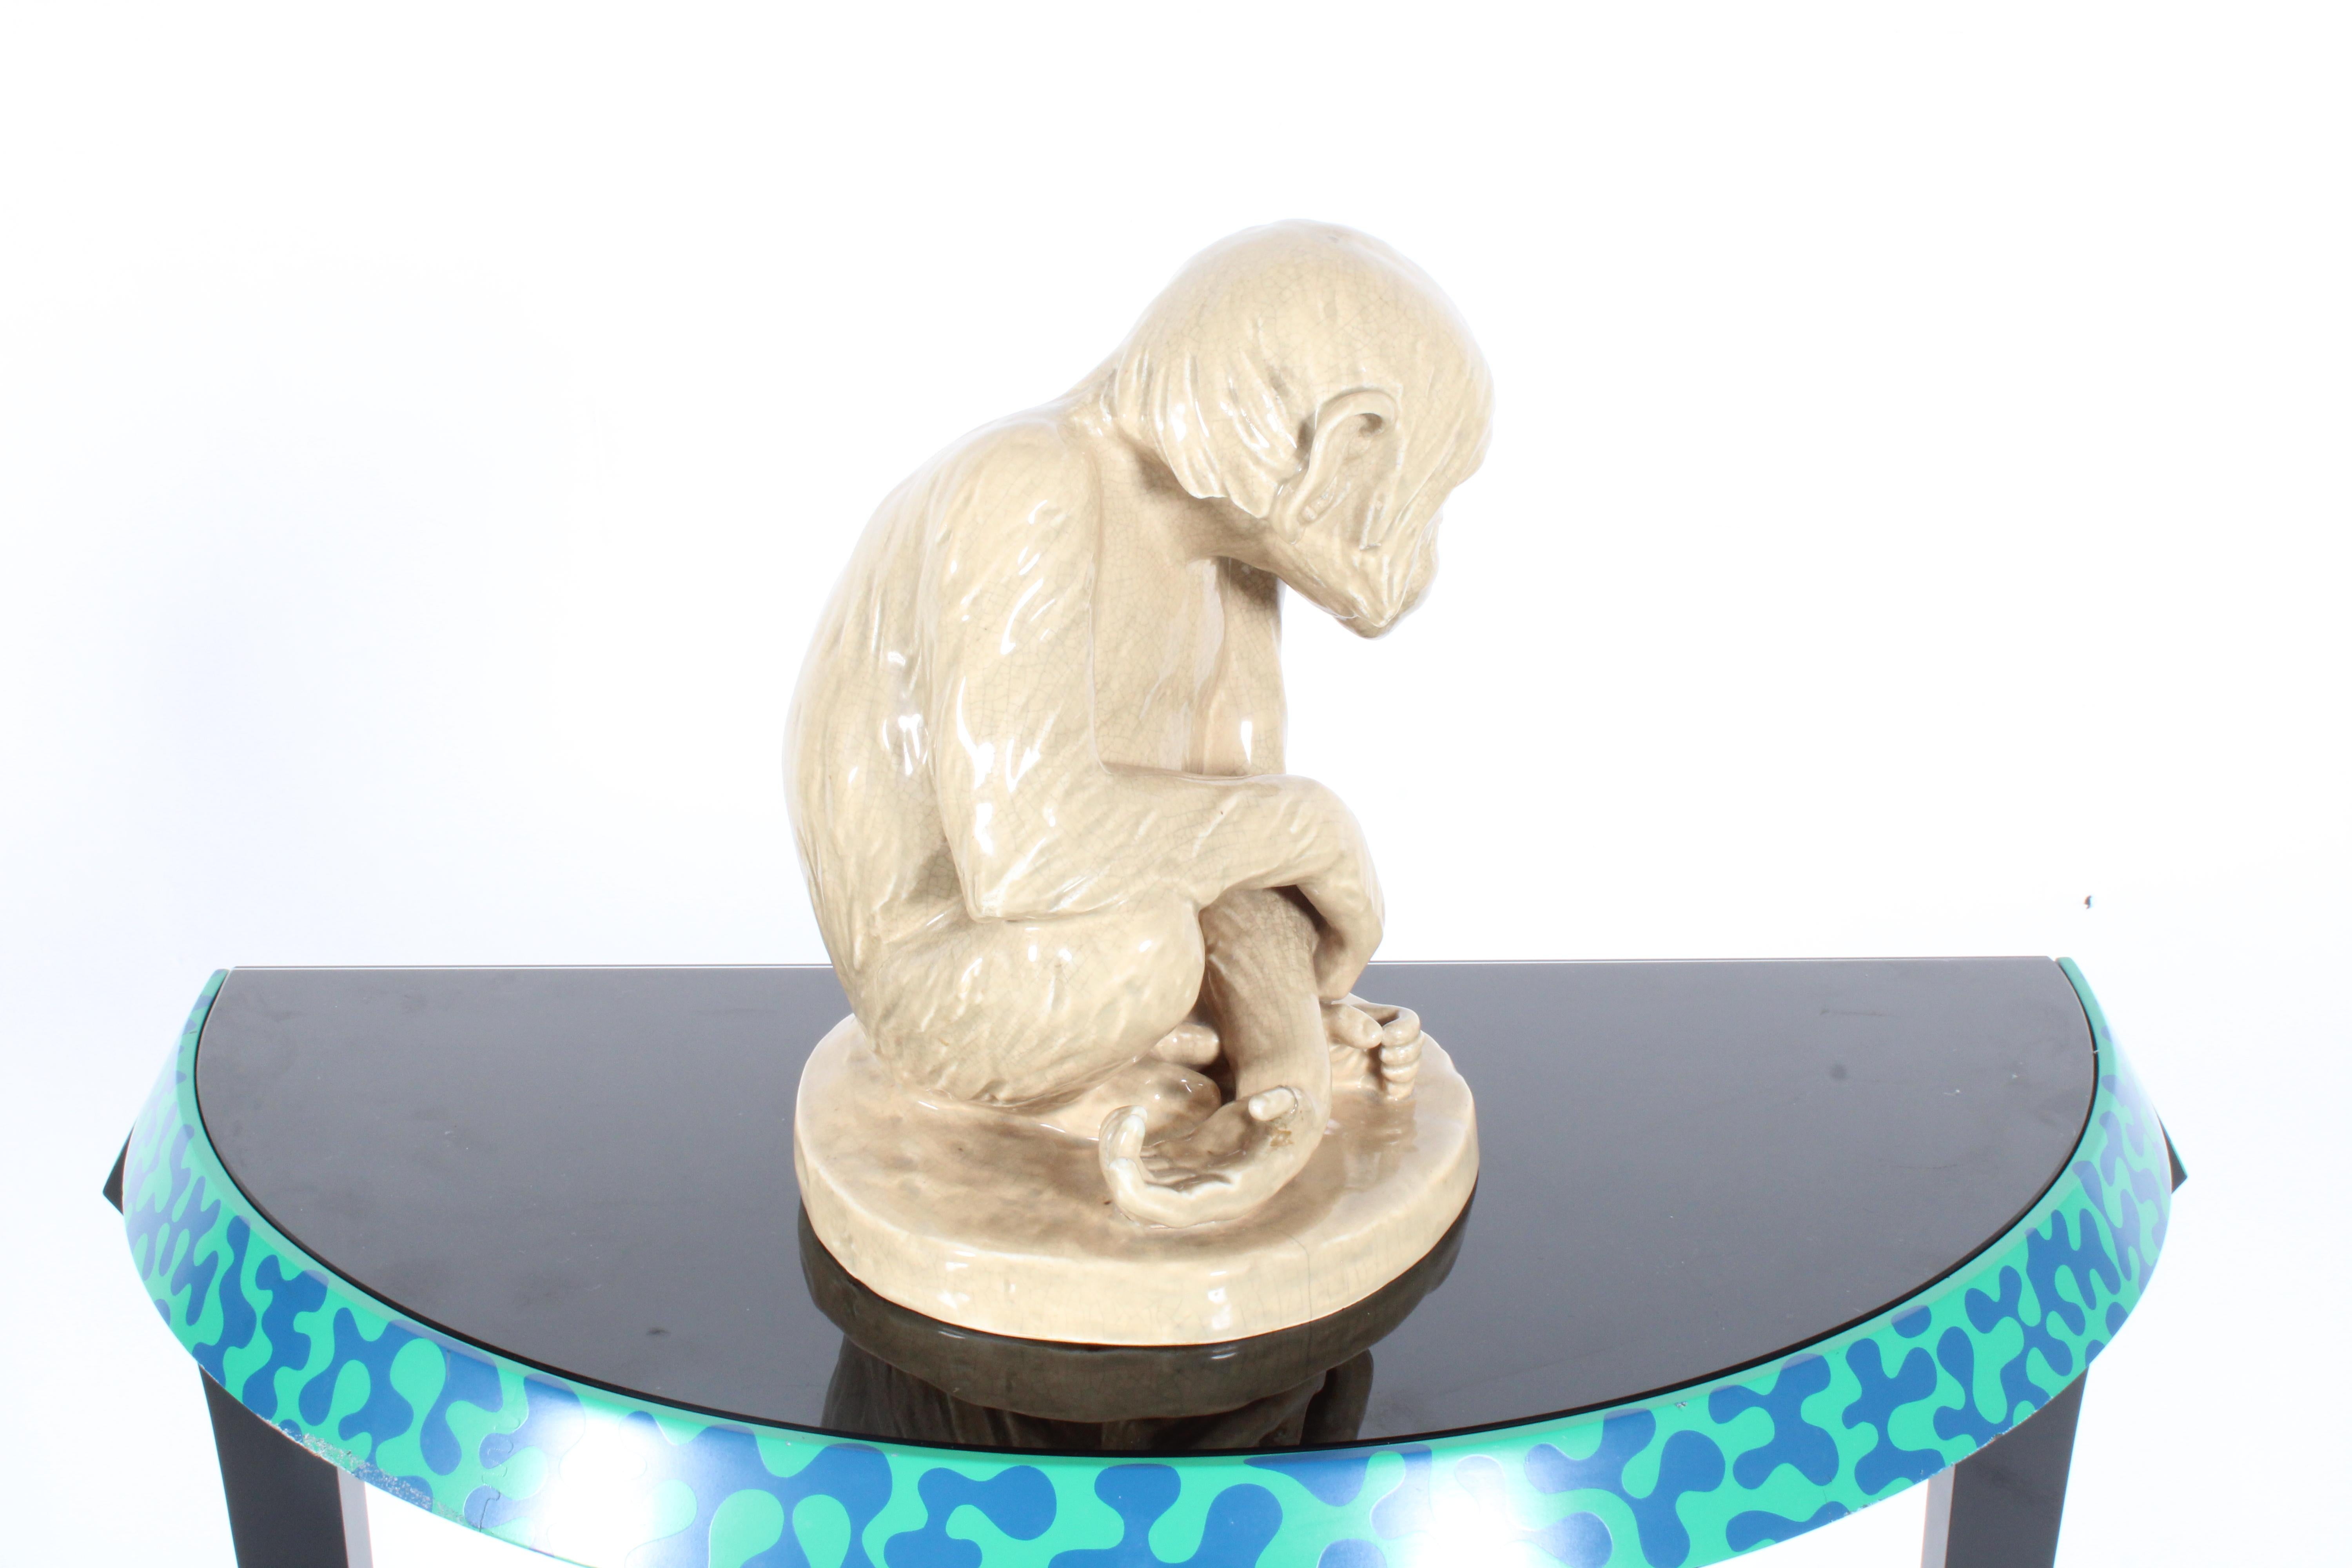 Late 20th Century Charming Vintage Ceramic In The Form Of A Chimpanzee  *Free Worldwide Shipping